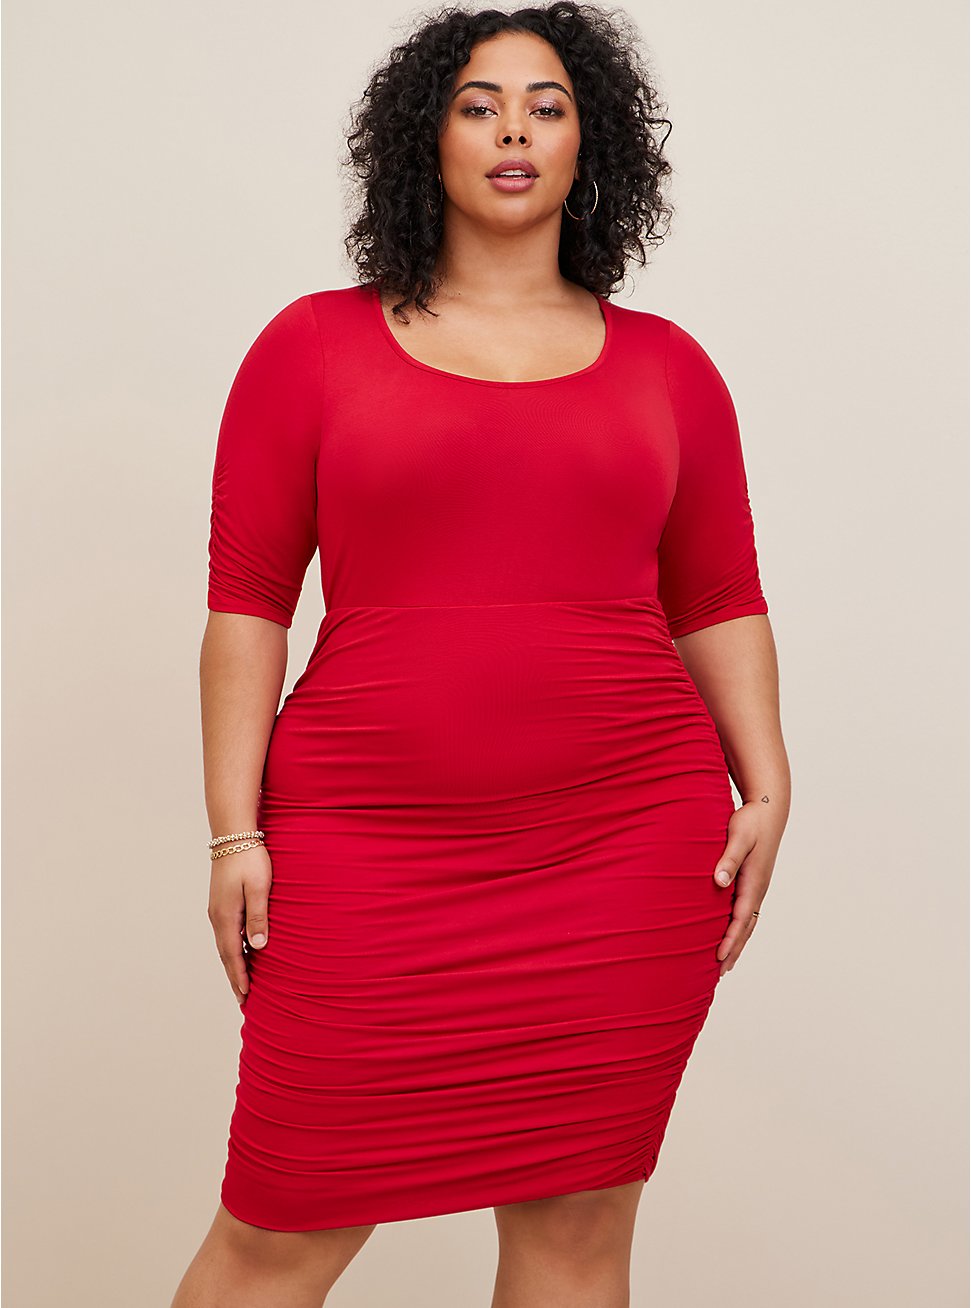 Mini Super Soft Elbow Sleeve Bodycon Dress, JESTER RED, hi-res